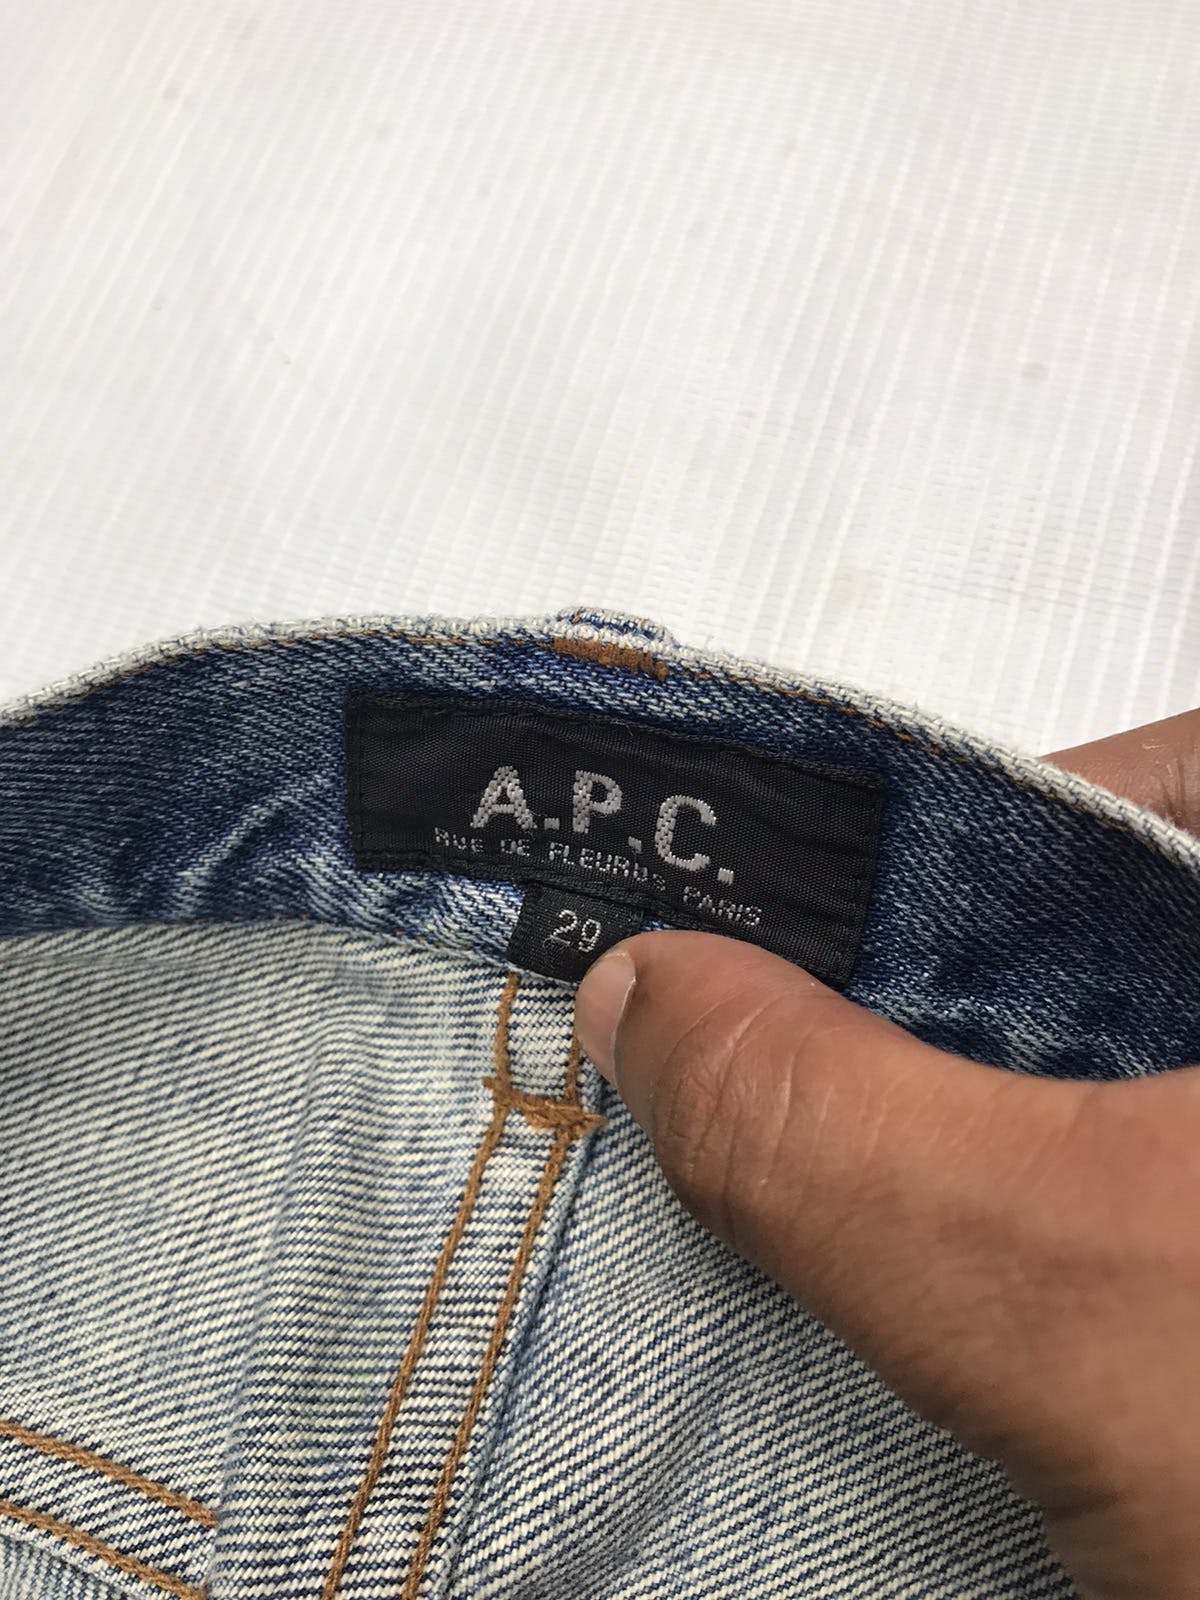 Rare!! A.P.C patch pocket distressed denim Made in Japan - 8